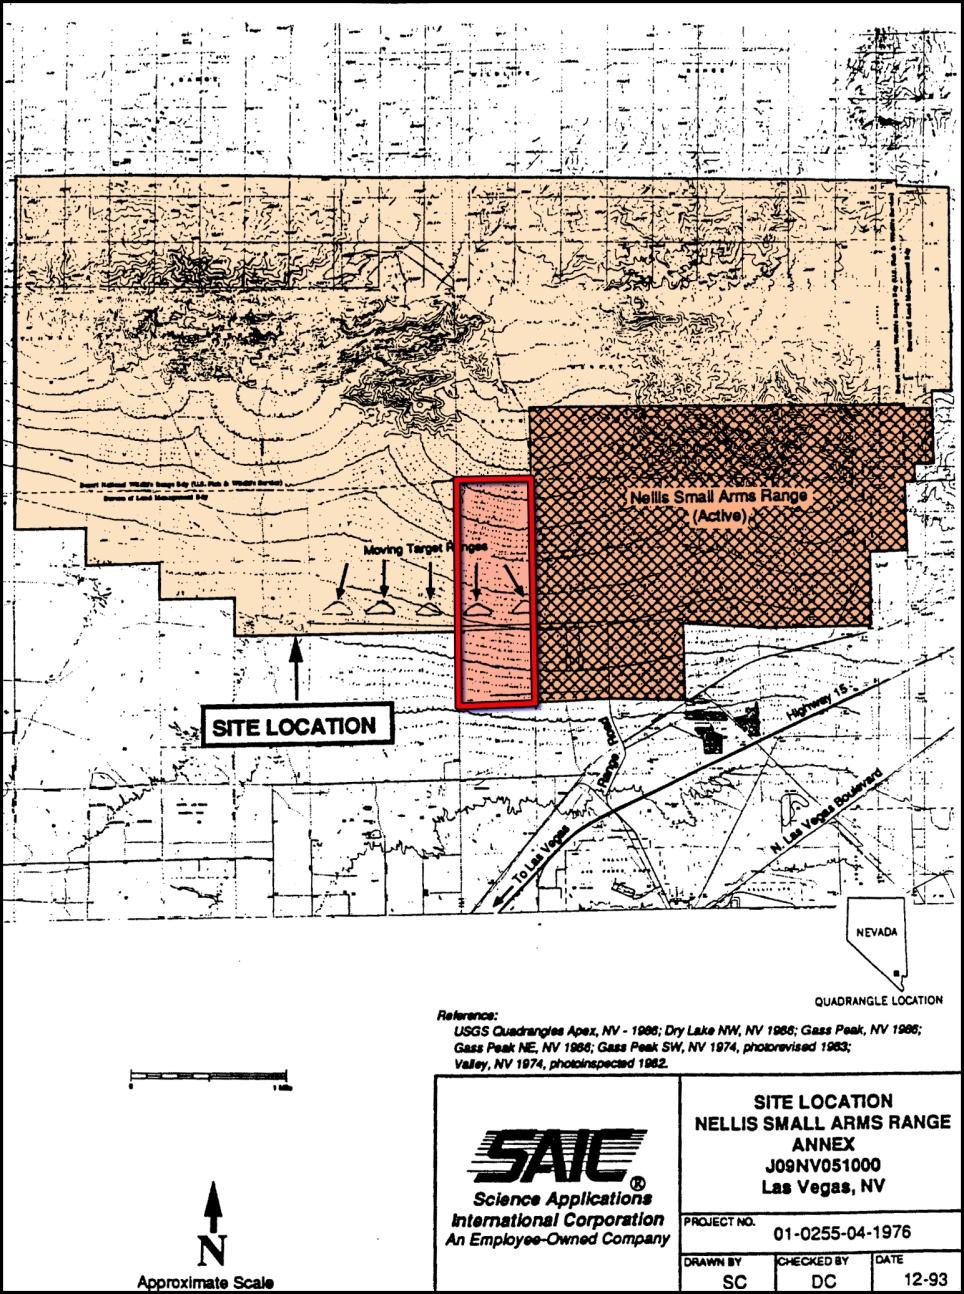 Phase 1, Environmental Site Assessment Former Nellis Small Arms Range Annex 36,000+ acres total Suspected small arms and unexploded ordnance Qualifies for Defense Environmental Restoration Program